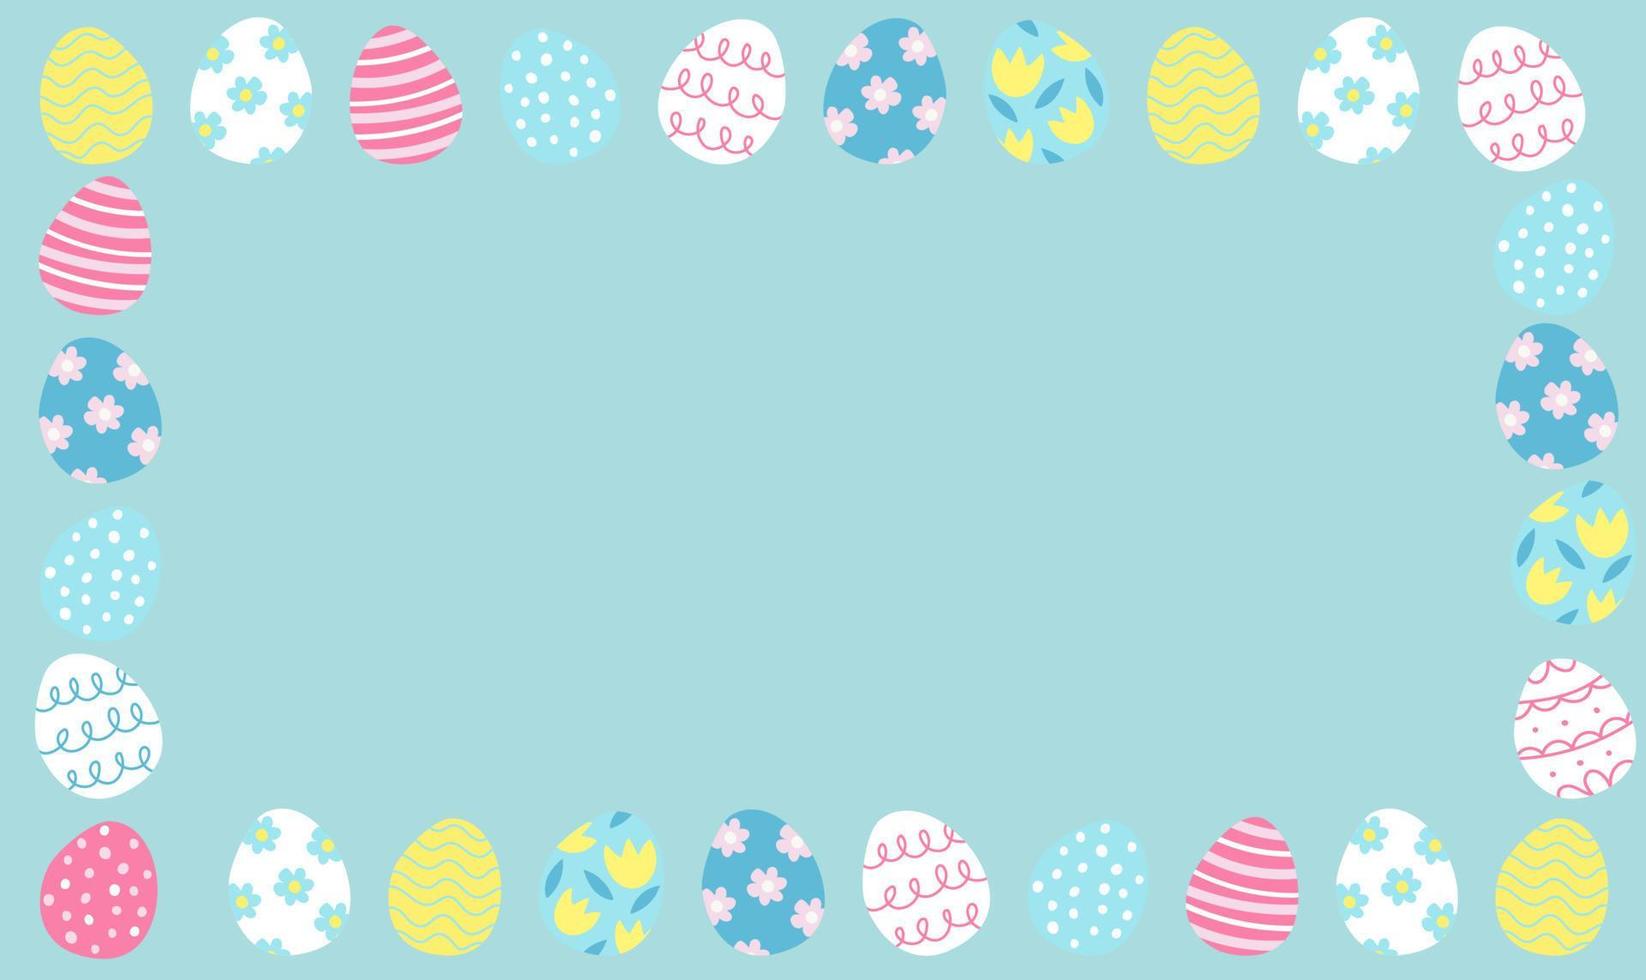 Easter banner with chocolate rabbits and beautifully painted eggs set on the grass. Concept of Easter egg hunt or egg decorating art. Background pastel color minimal design vector